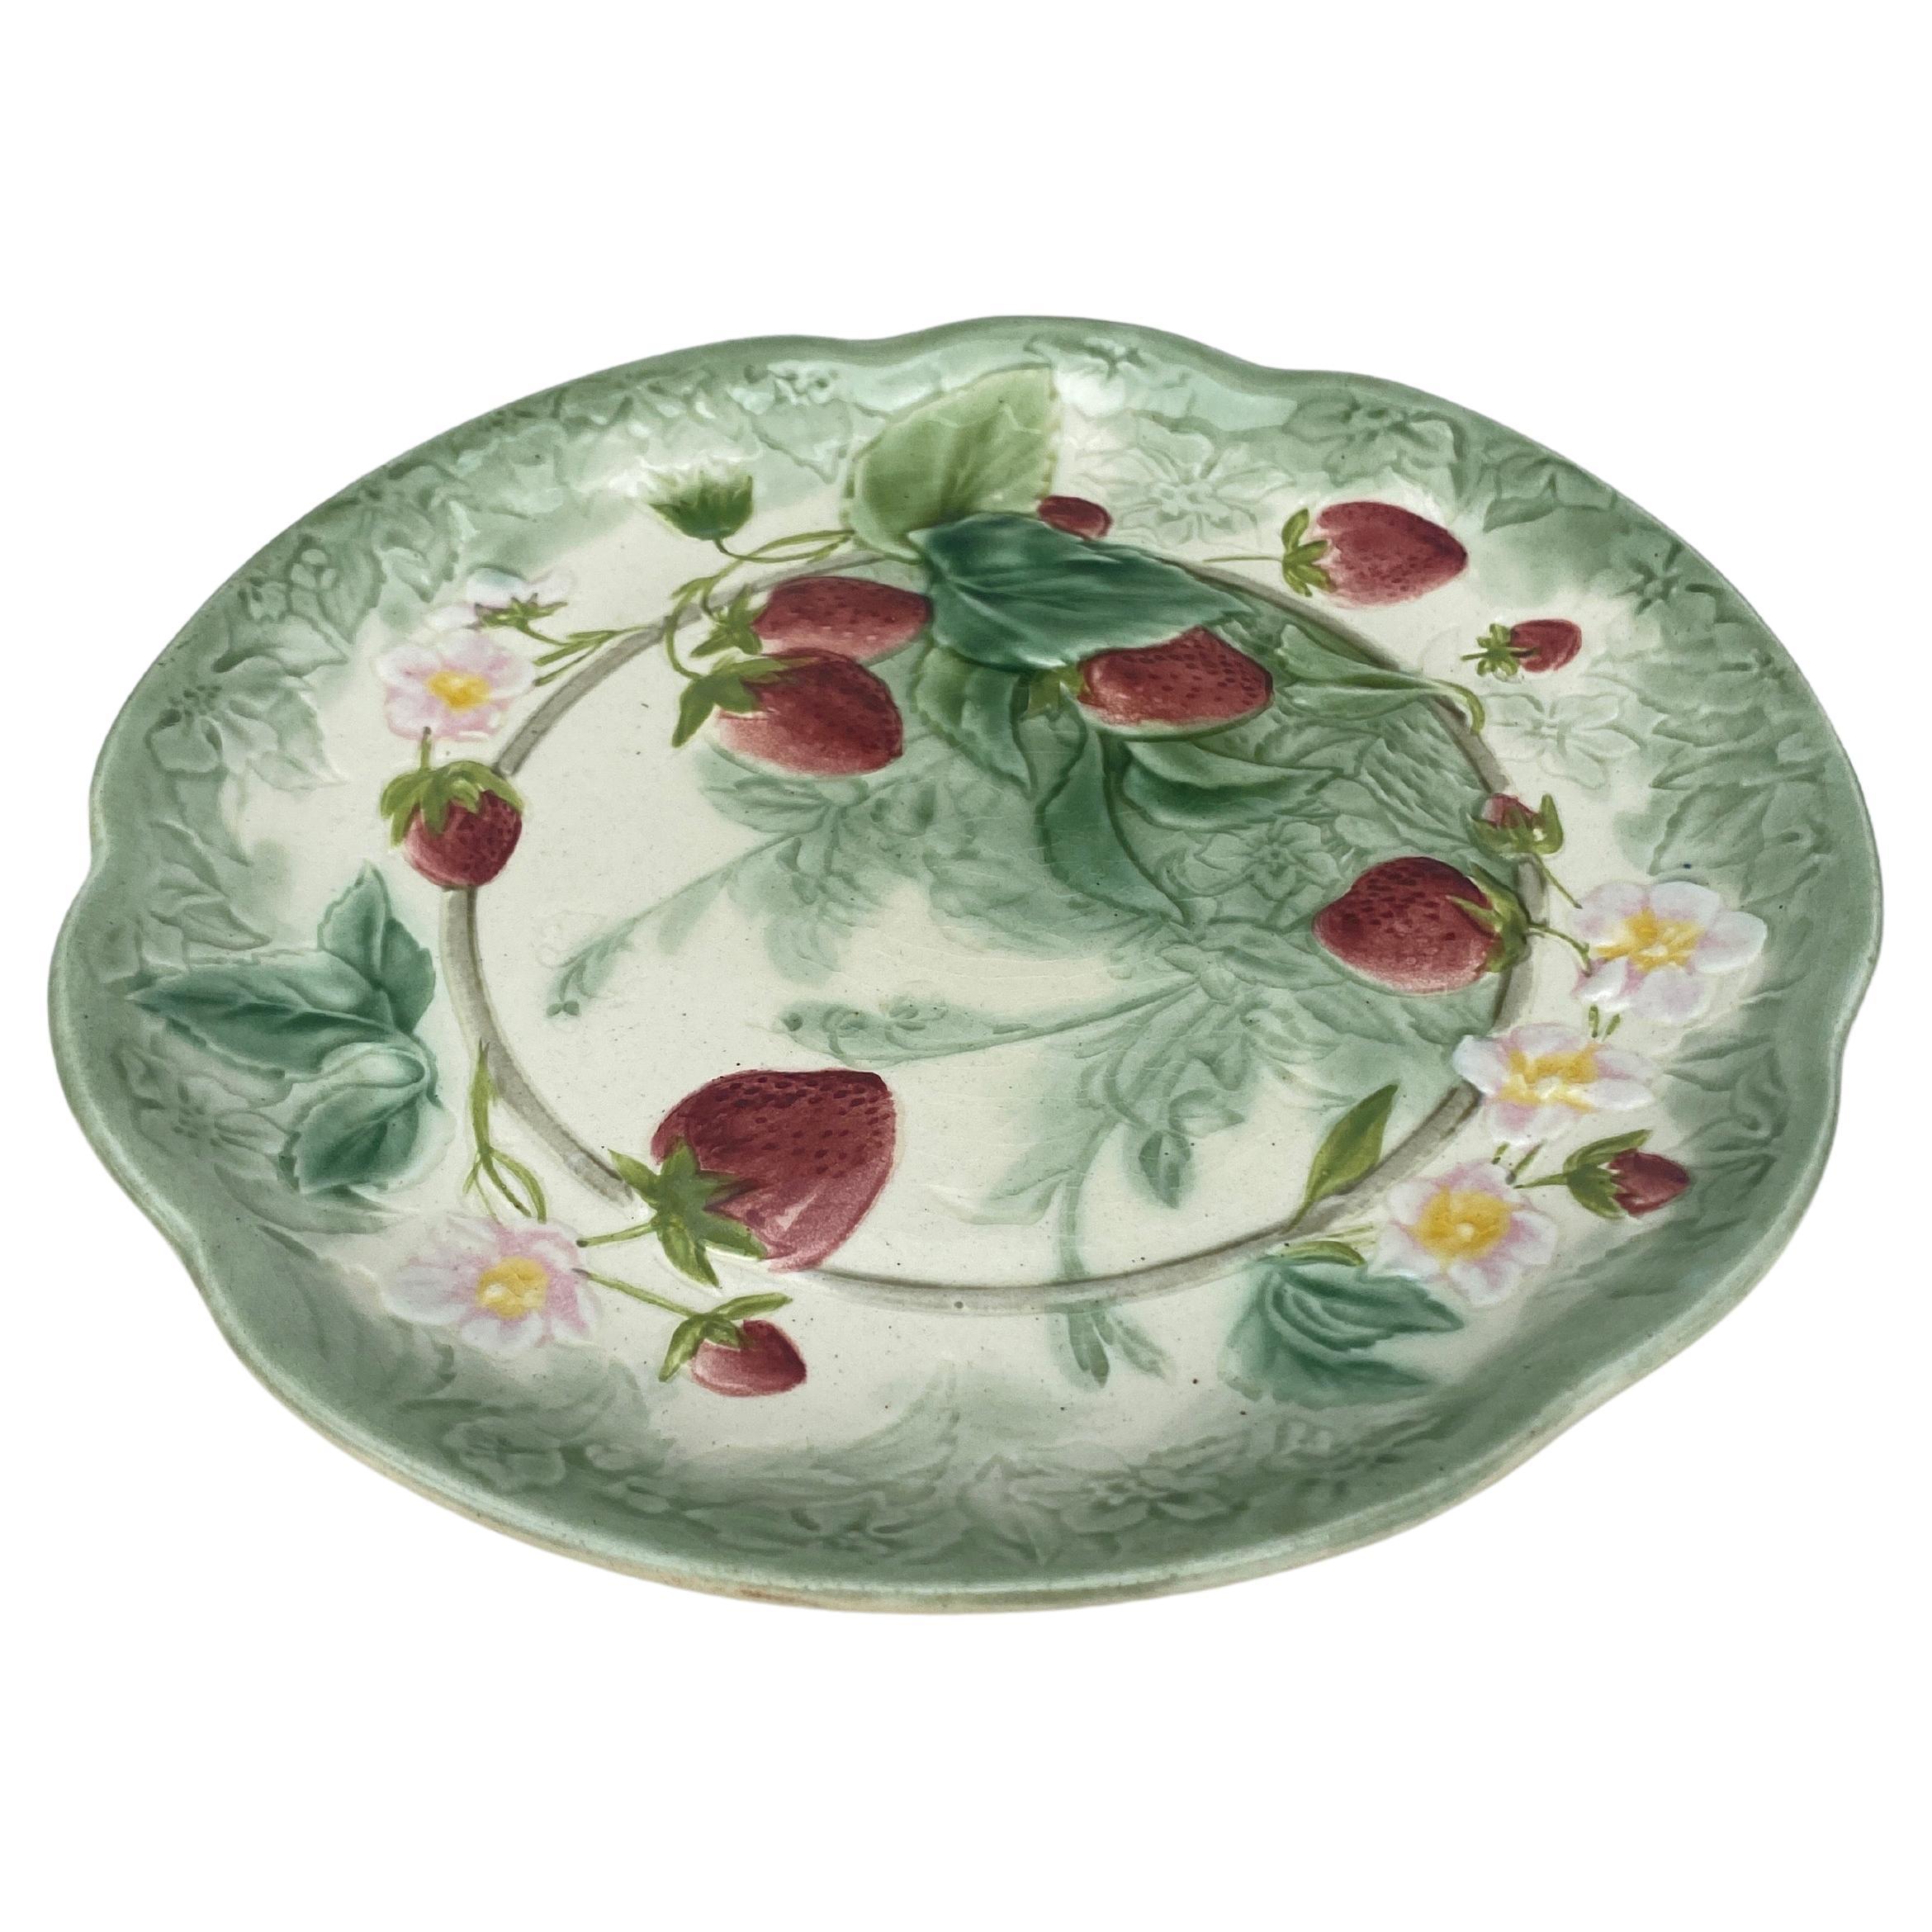 19th Century Majolica Strawberries Plate signed Choisy Le Roi.
Made for Higgins & Setter New York.
The Higgins & Seiter Company of New York City began selling decorations for the table, including rich-cut glass in 1887. By 1891 the firm was